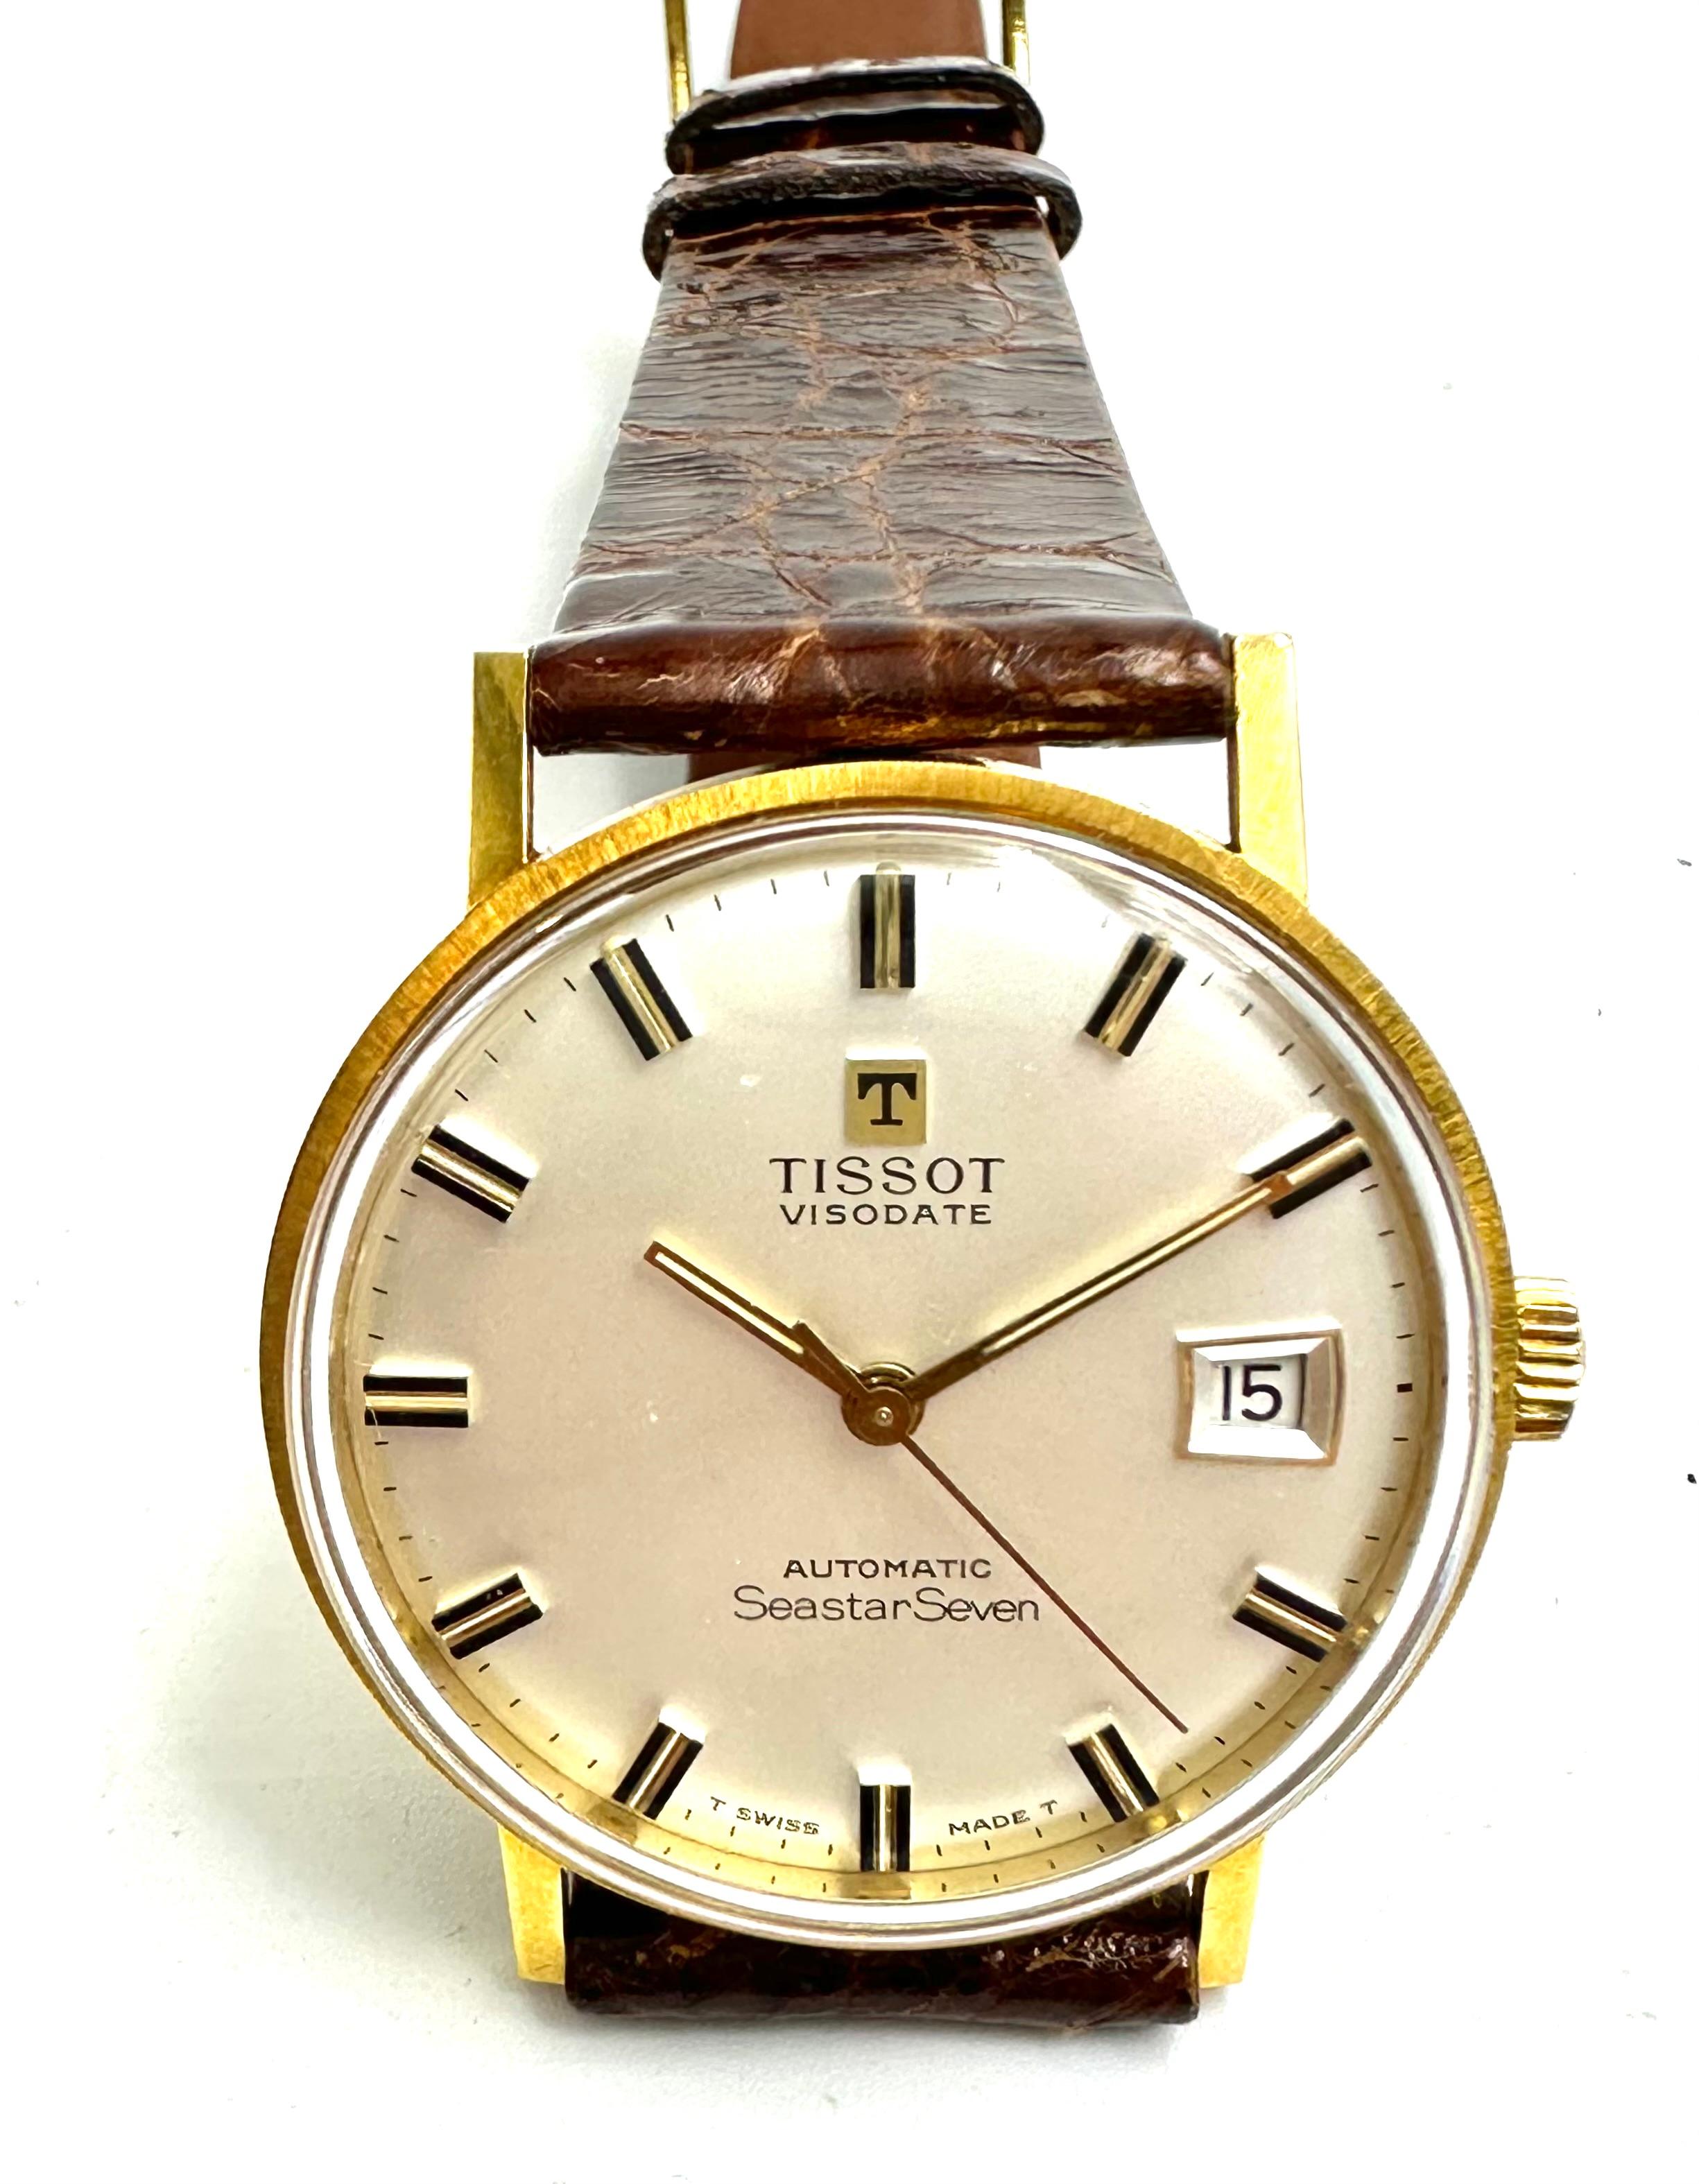 Get your hands on this vintage beauty! 
The Gold case Tissot Visodate Seastar Seven automatic watch is a classic piece from around 1970. 
With a 12-hour silver dial, acrylic crystal, central second and date indicator, this Swiss-made timepiece is